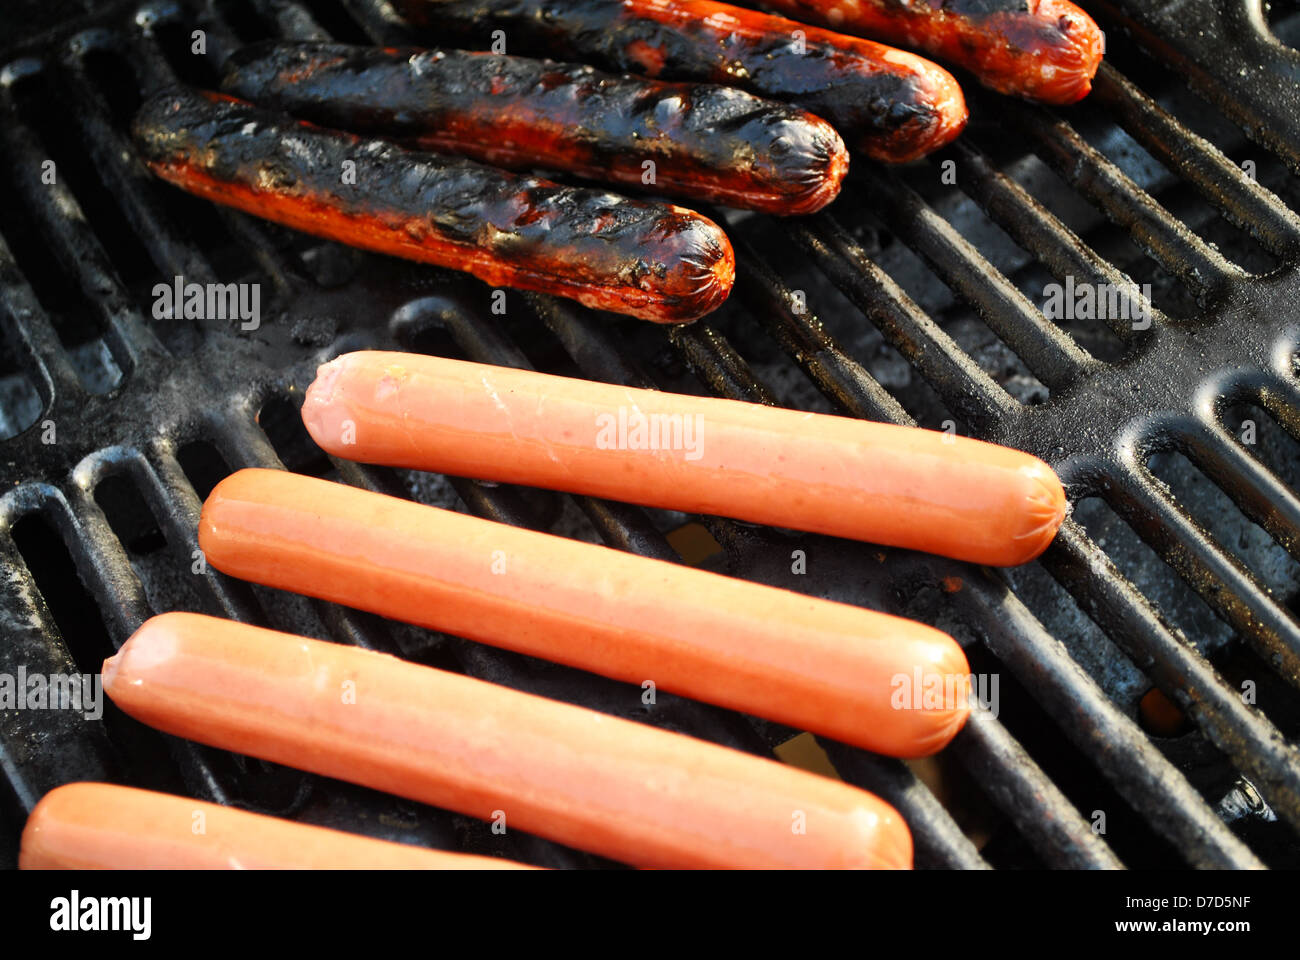 Grilling Hotdogs on a Summer Grill Stock Photo